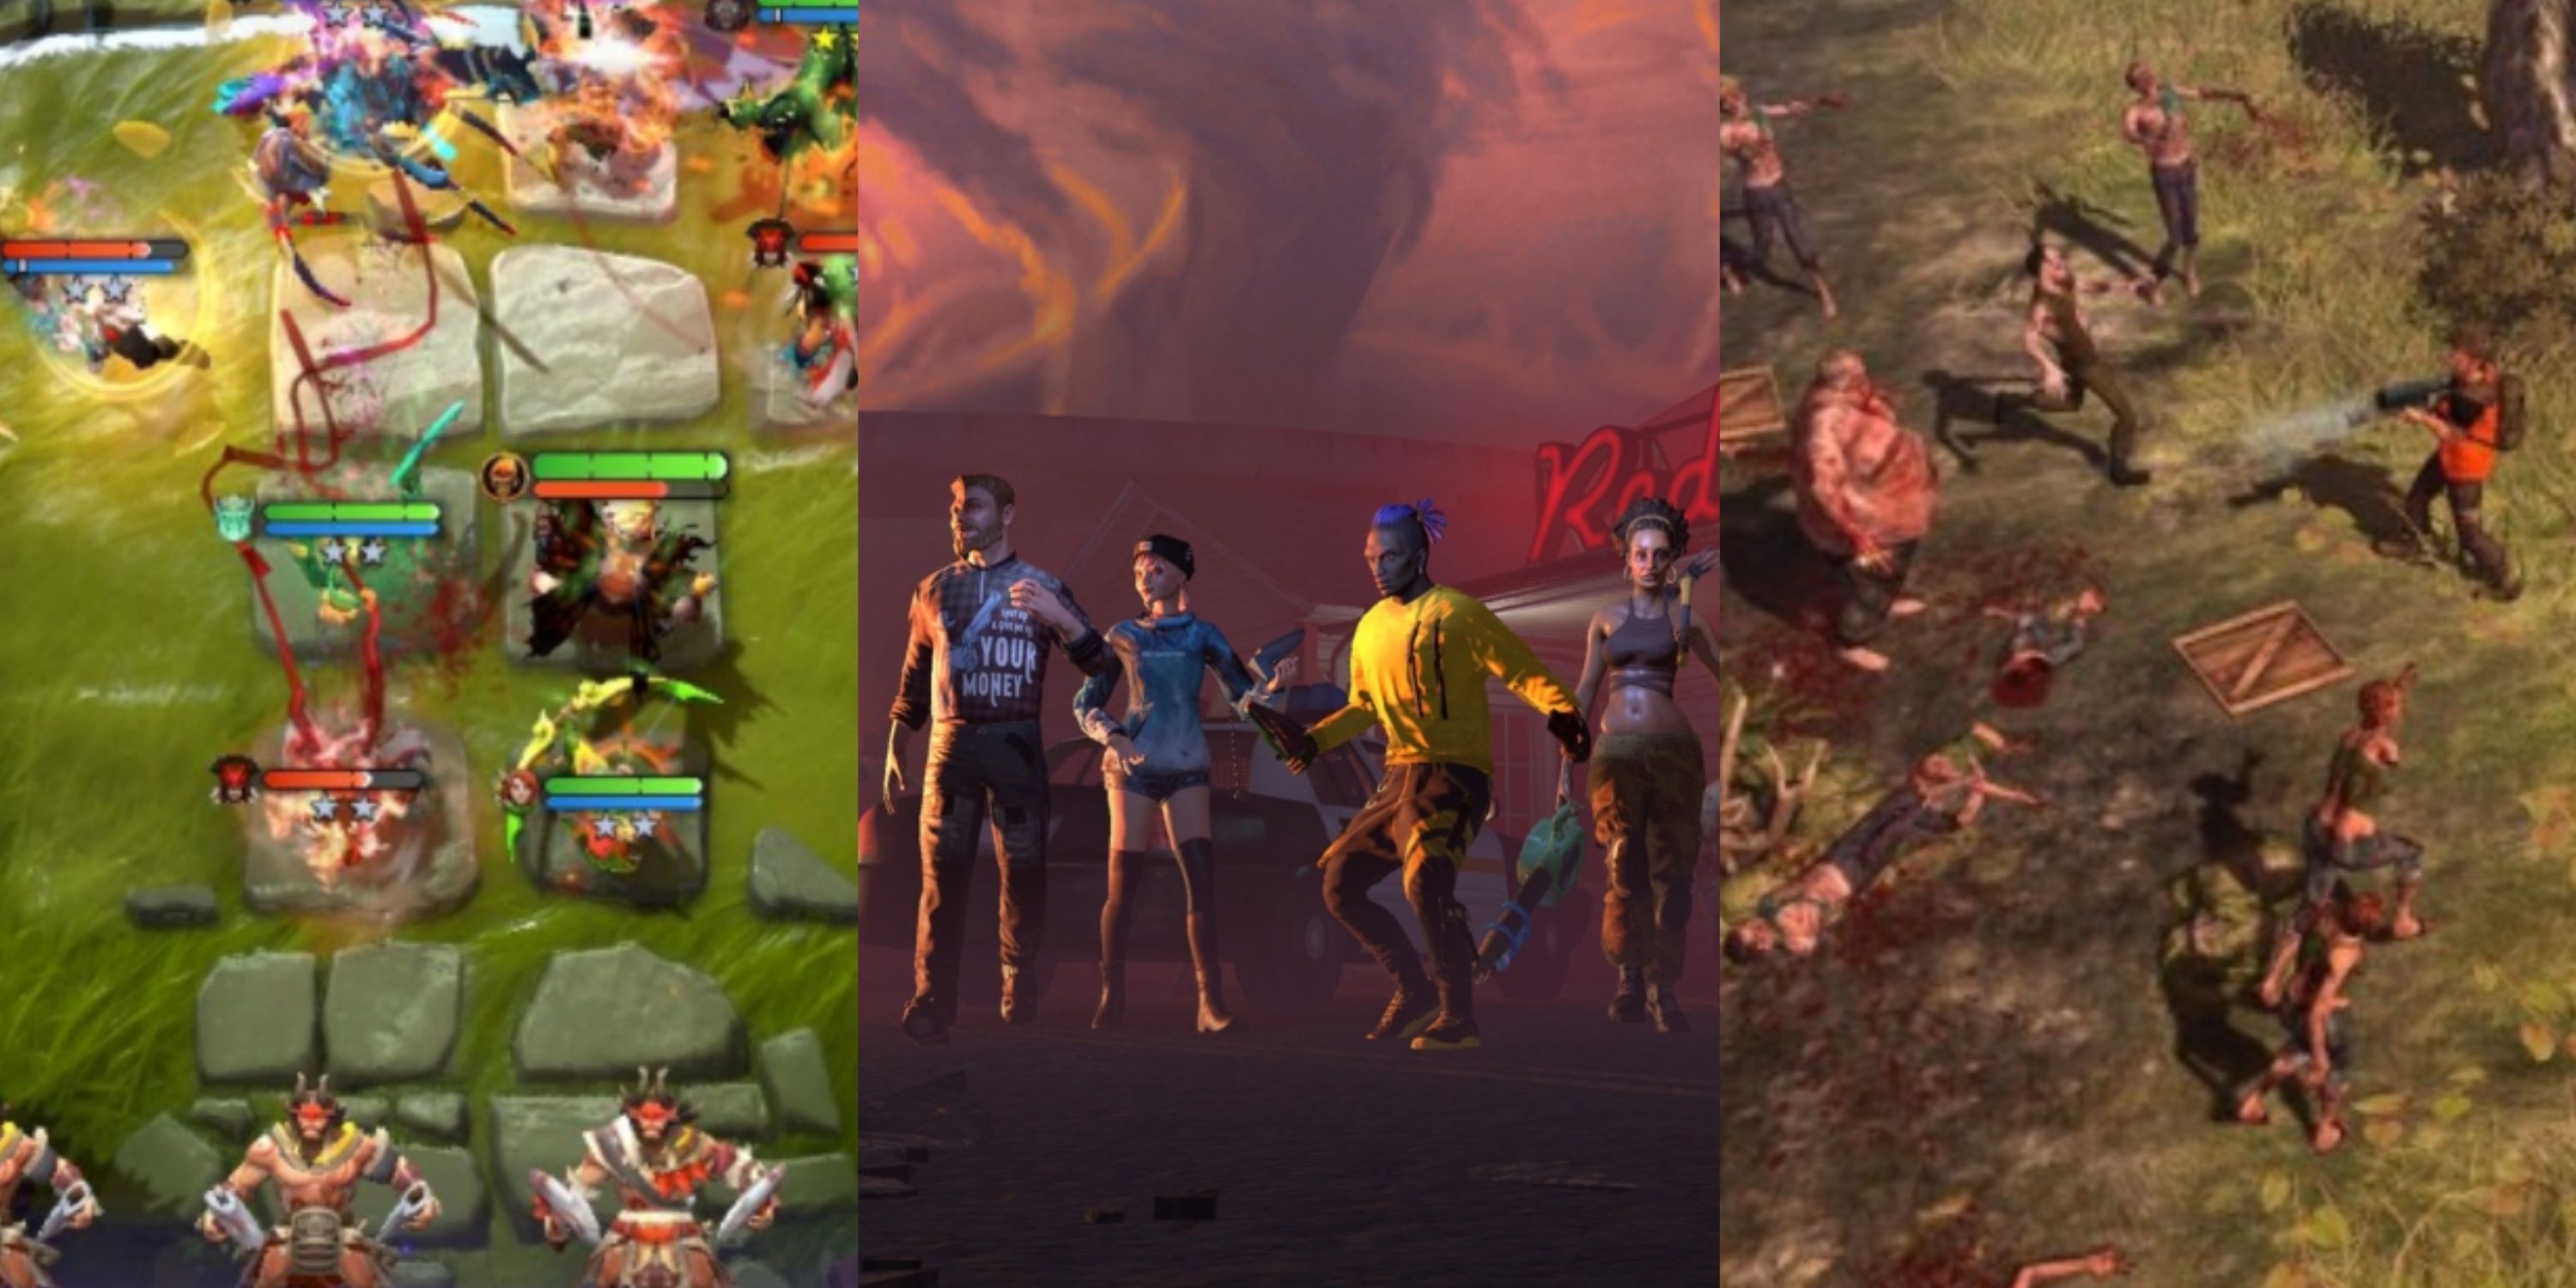 Split image of gameplay from Dota Underlords, REQUSITION VR, and How To Survive